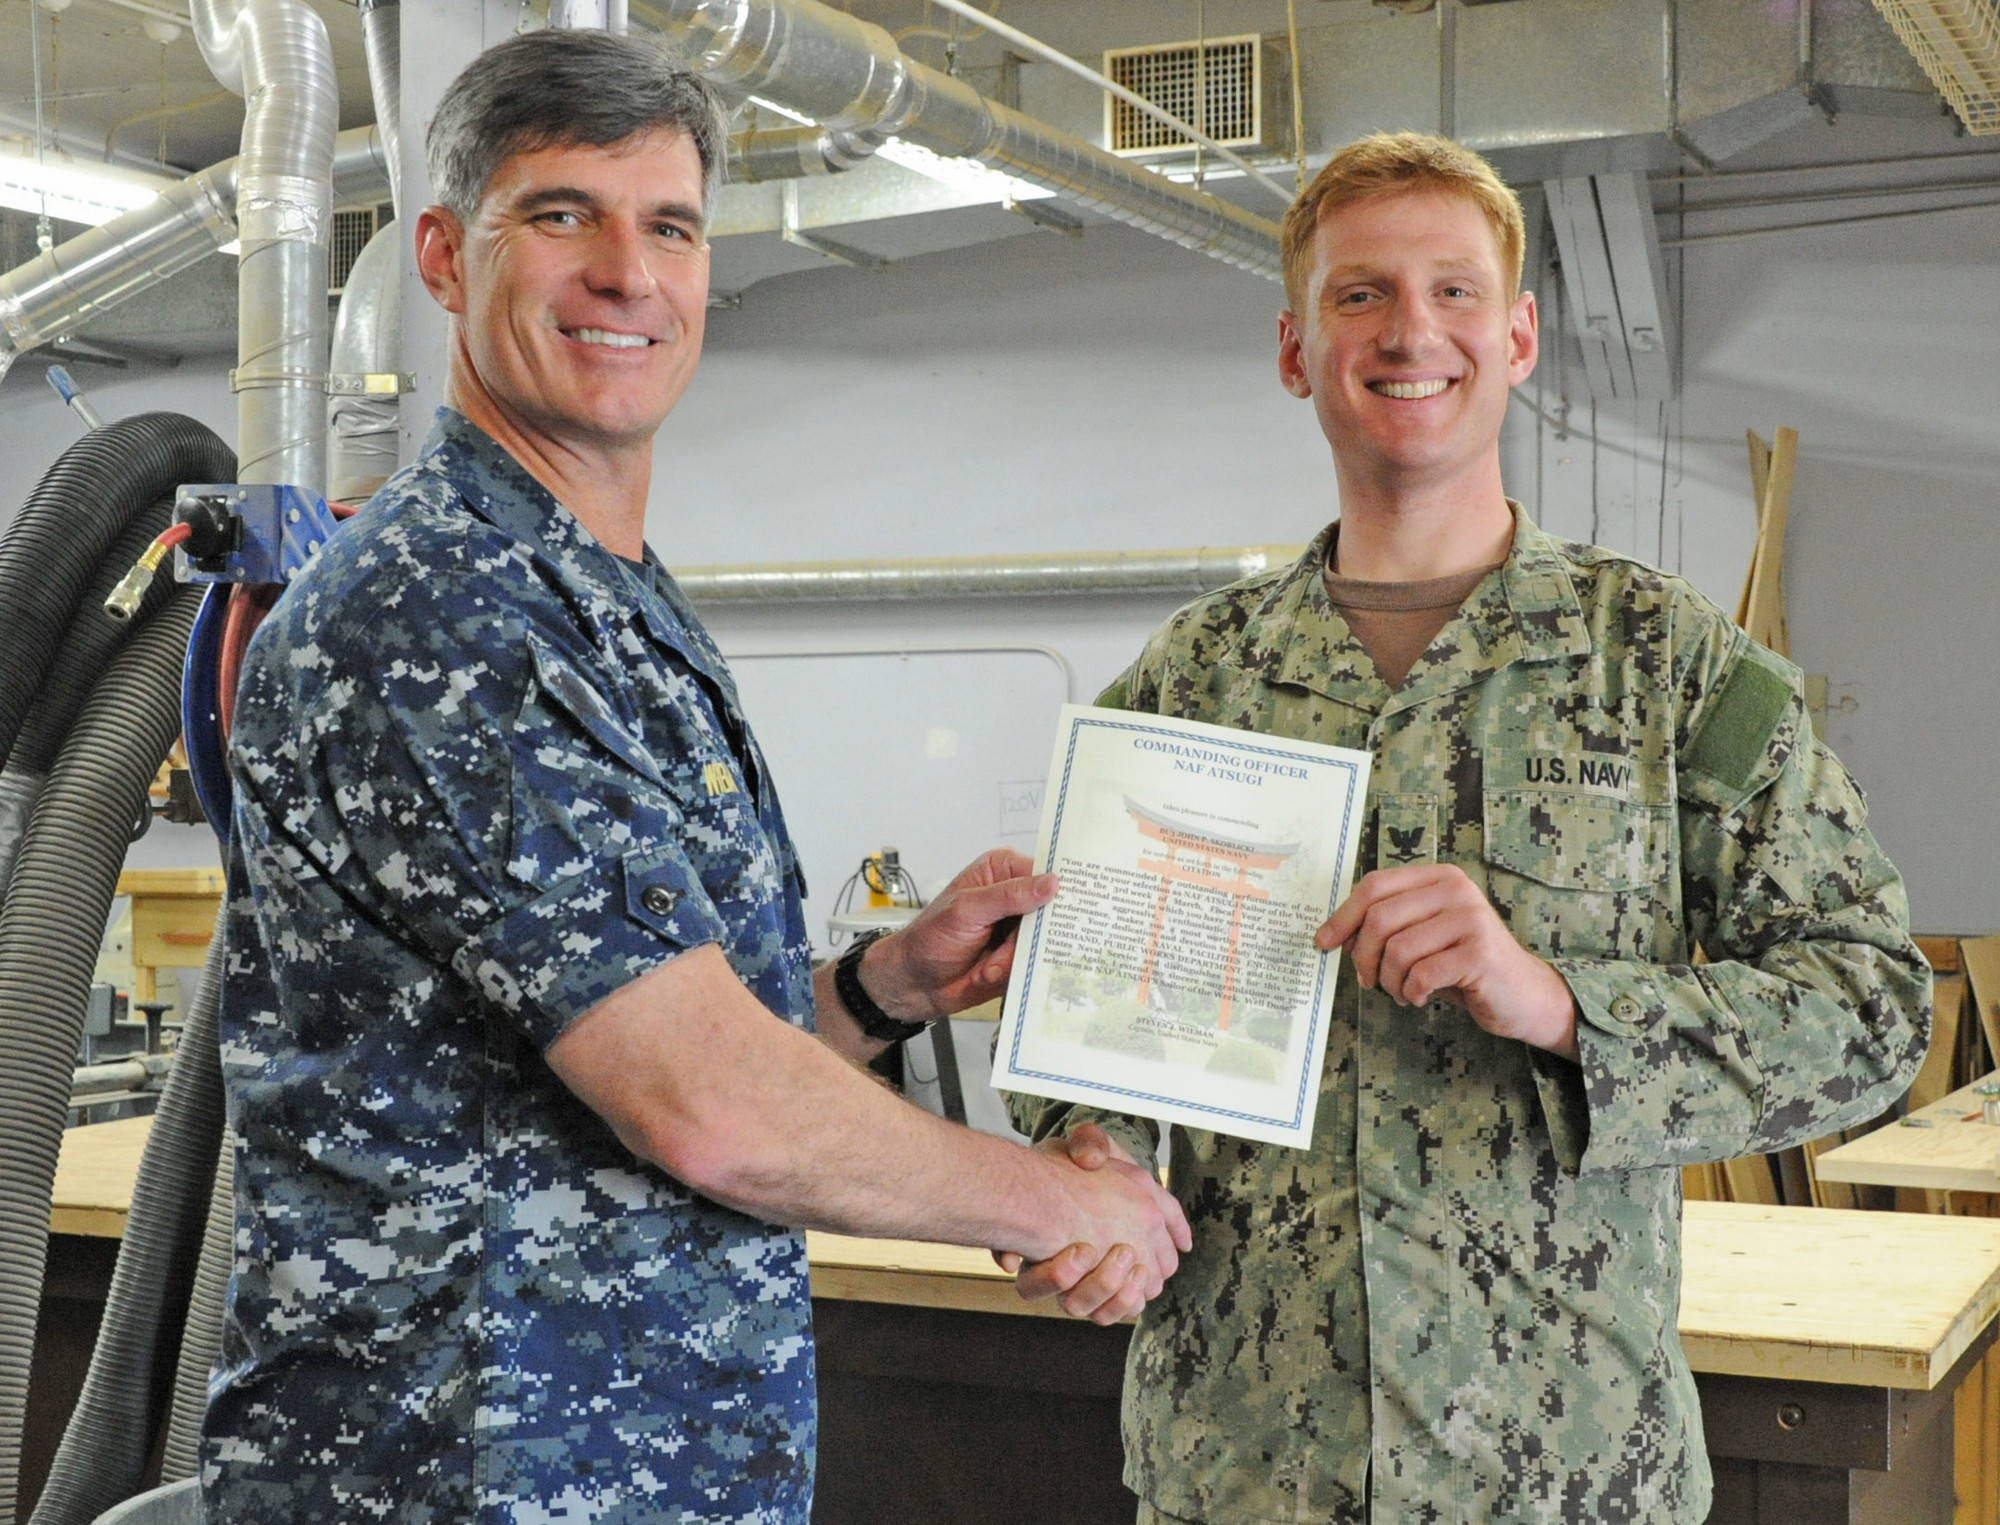 Skoblicki, right, received a letter of commendation from Naval Air Facility Atsugi Commanding Officer Capt. Steven Wieman in recognition of his selection as Sailor of the Week.